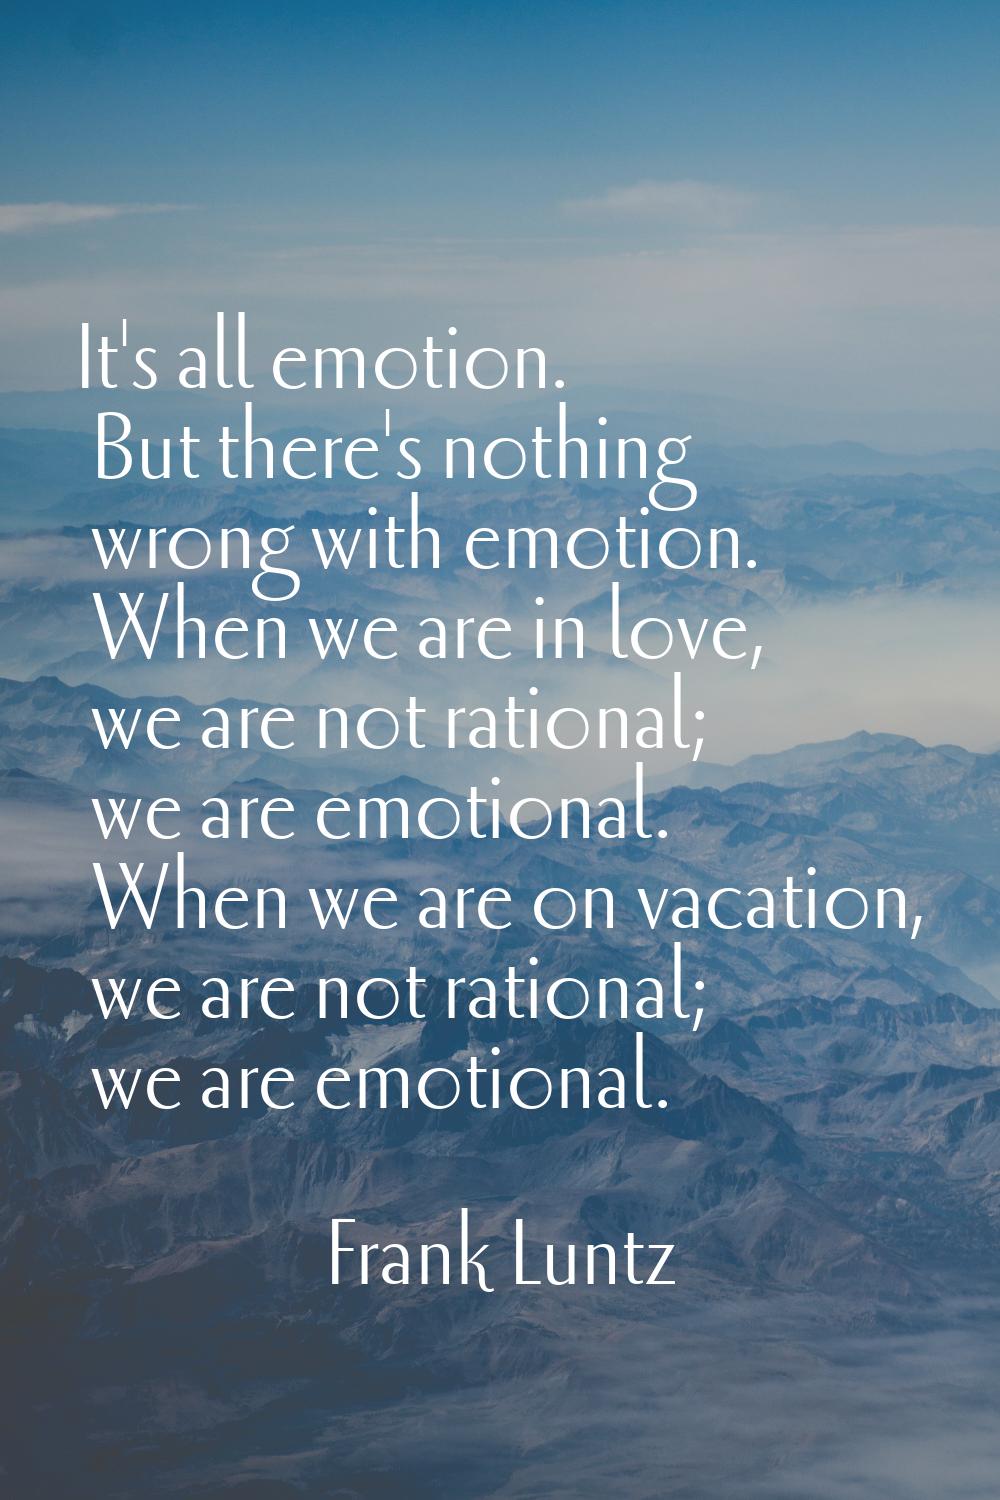 It's all emotion. But there's nothing wrong with emotion. When we are in love, we are not rational;